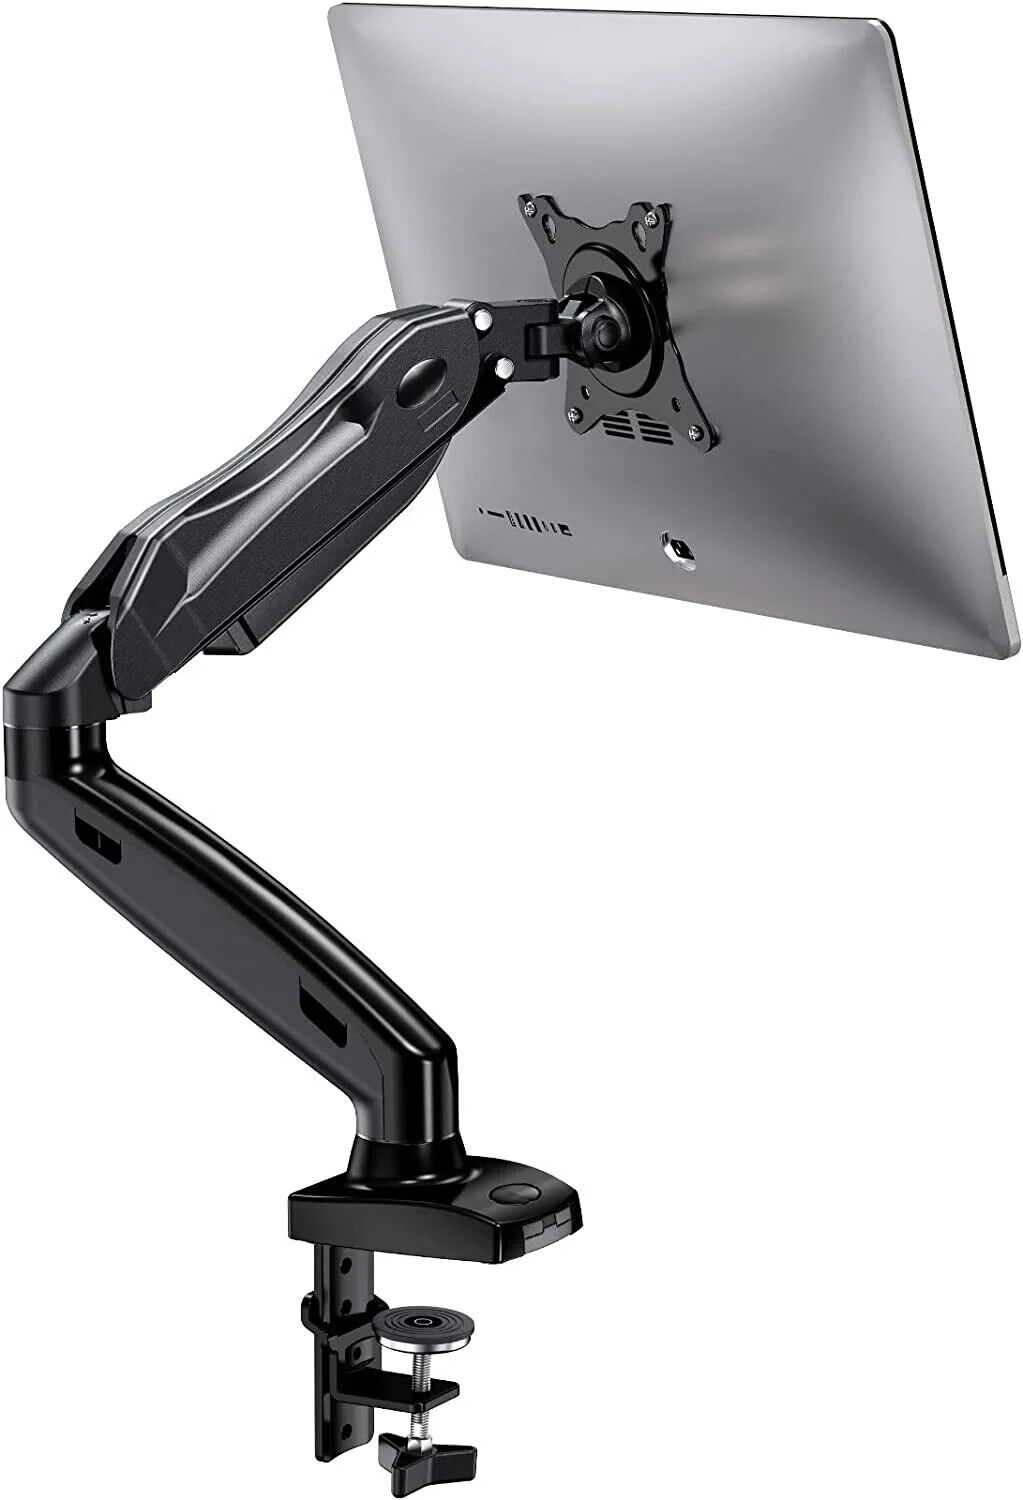 BRAND NEW Huanuo HNSS18B Single Monitor Arm Tall Computer Monitor Stand